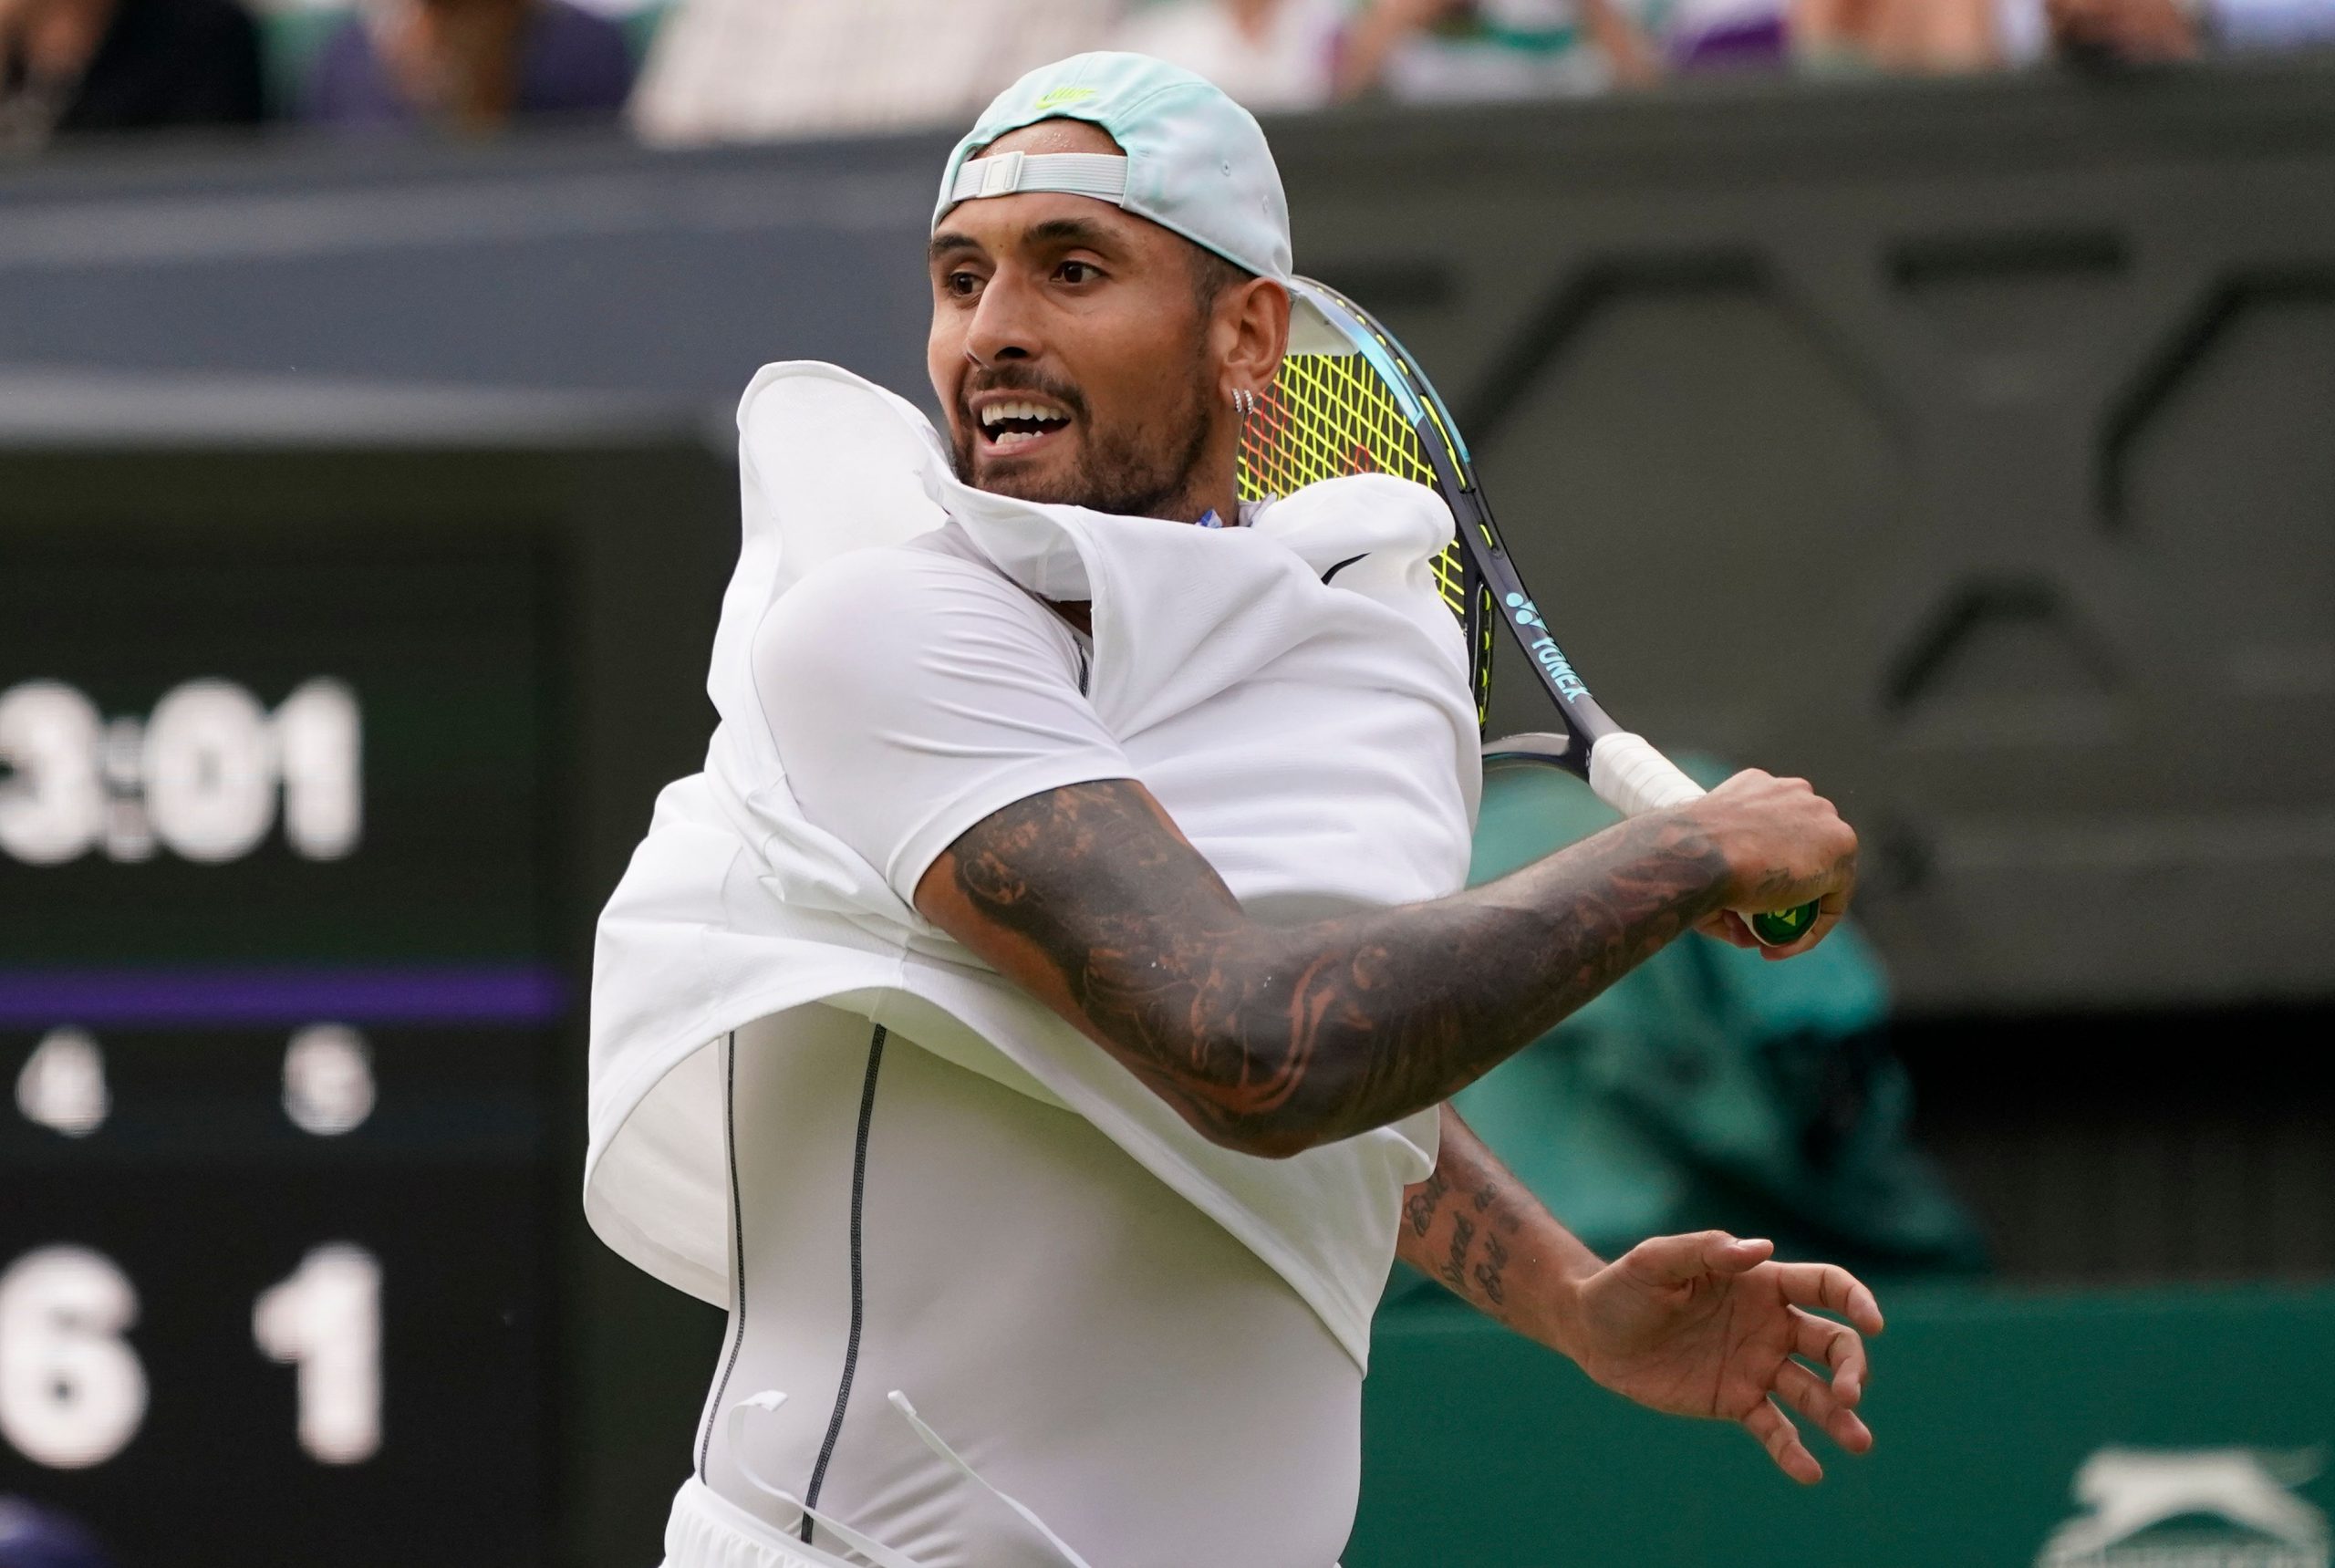 Kyrgios wishes Nadal ‘quick recovery’ after Spaniard withdraws from Wimbledon